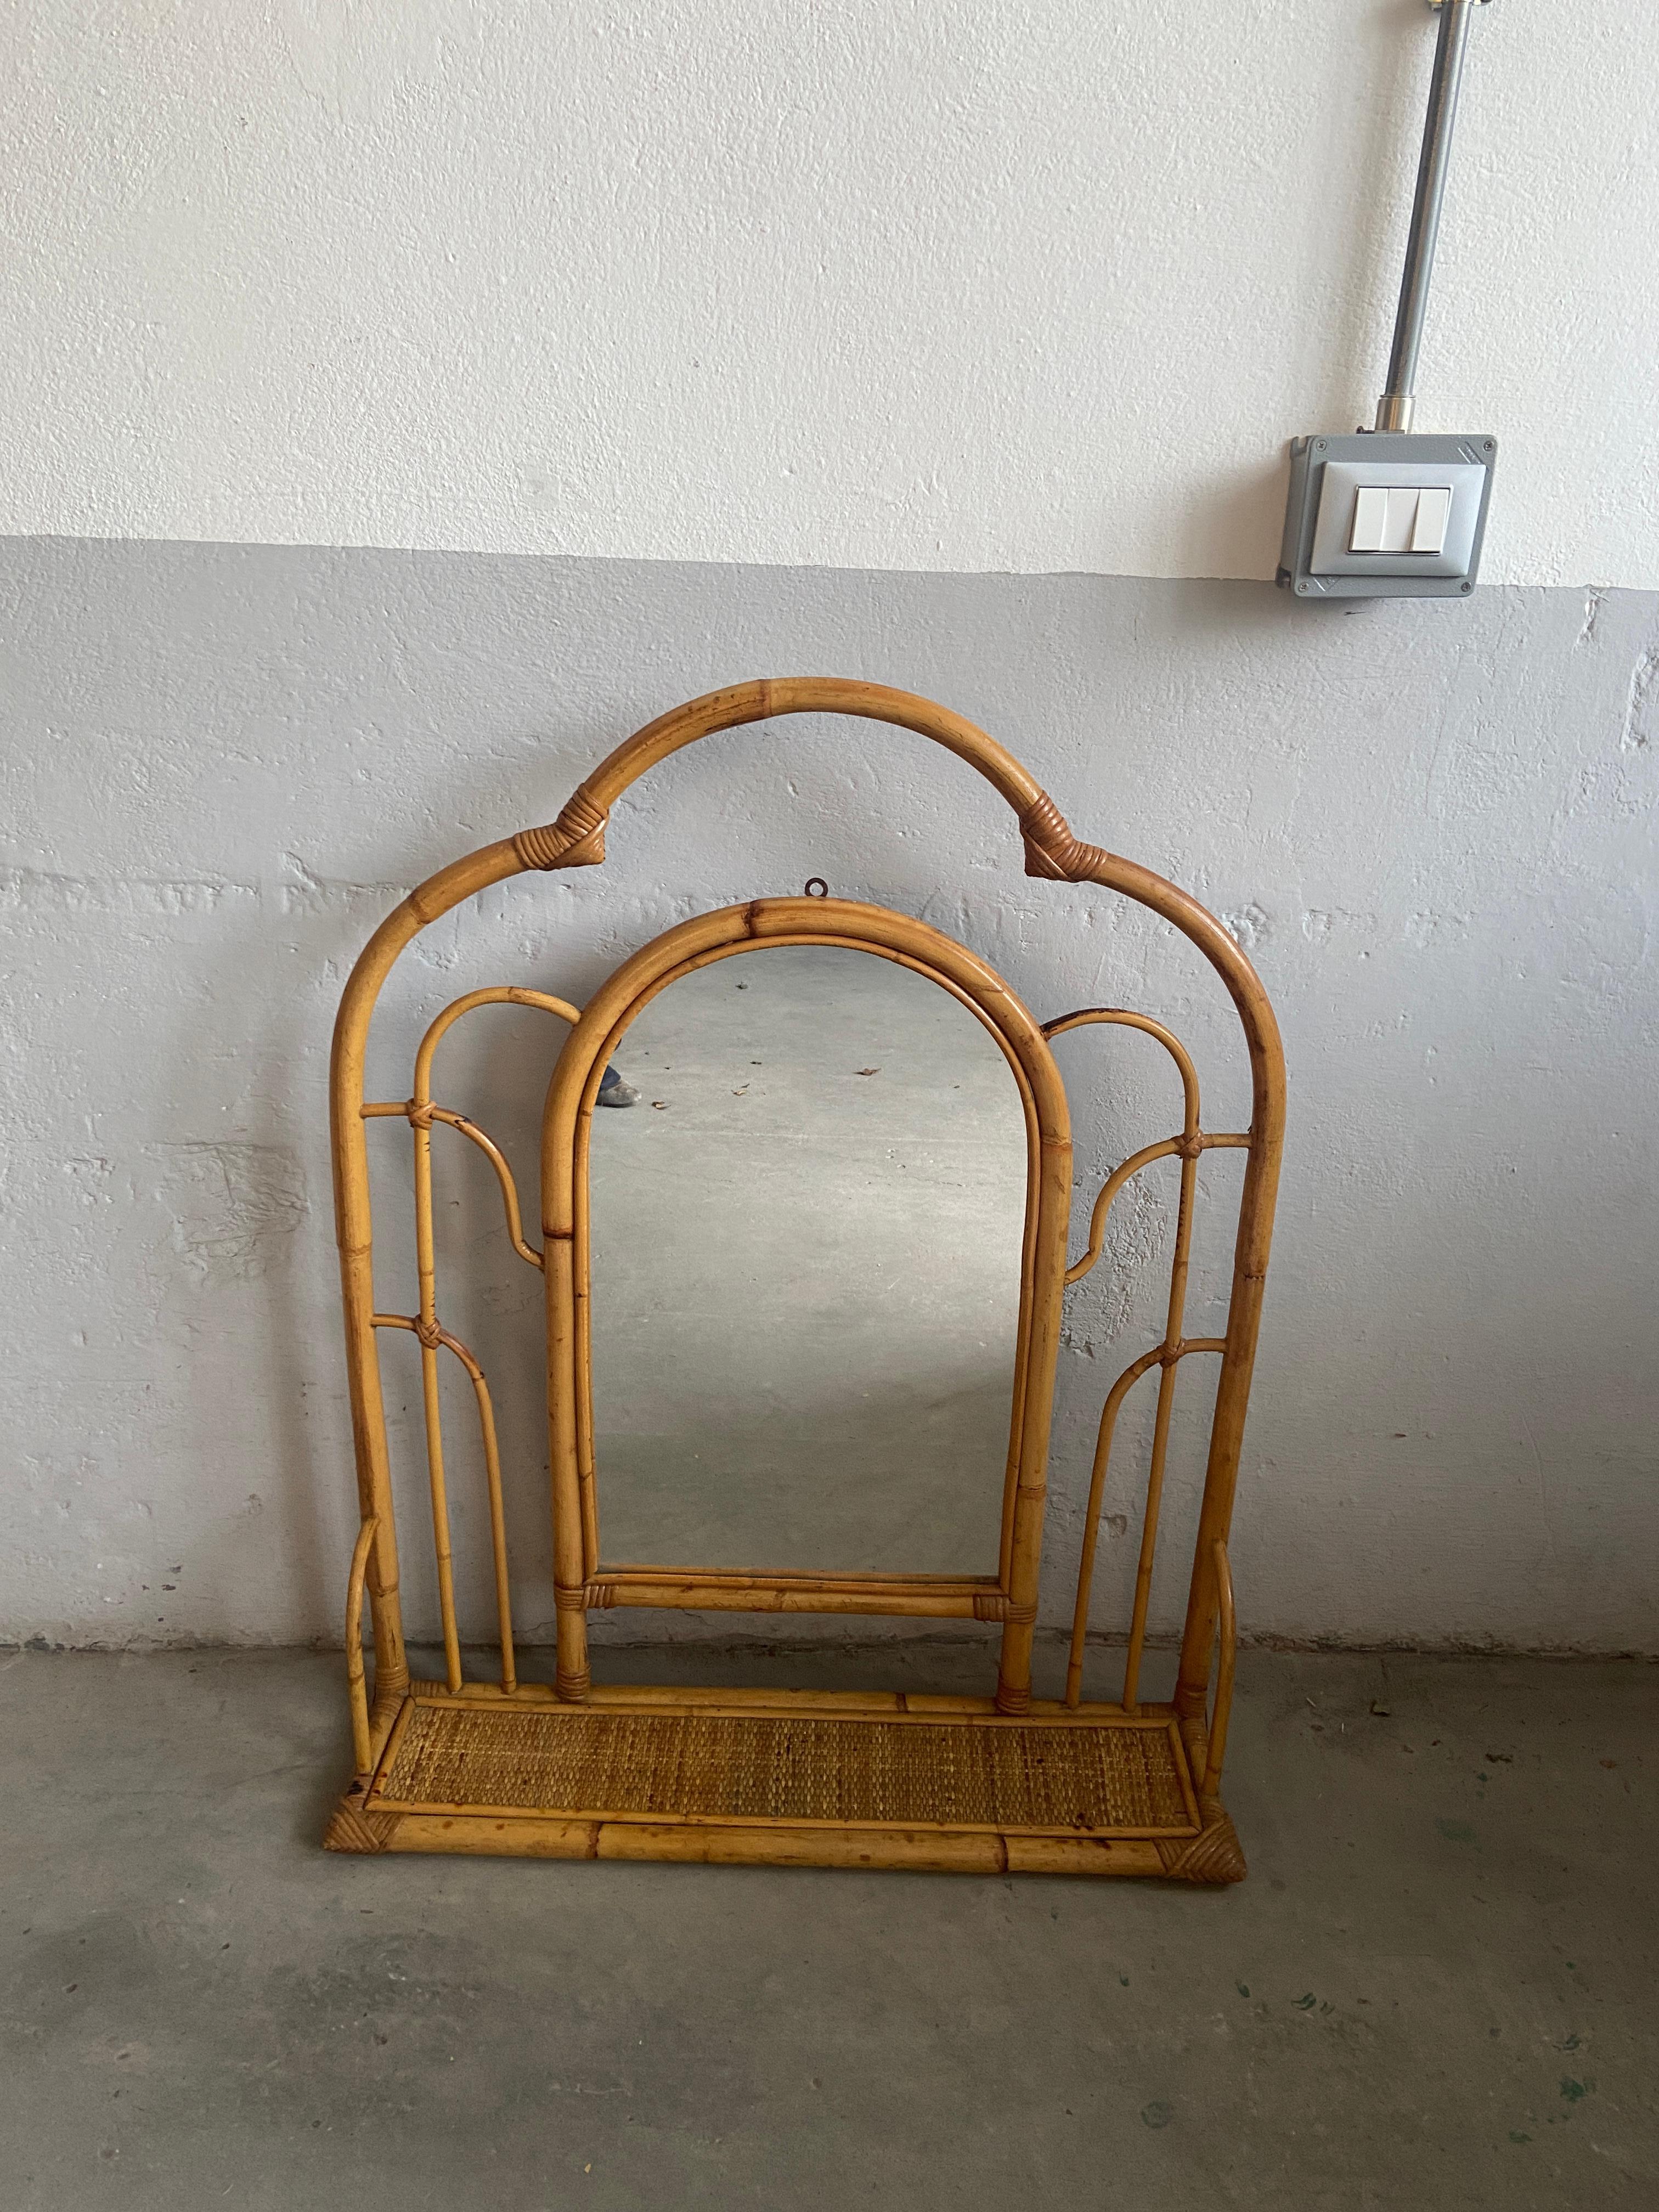 Mid-Century Modern Italian bamboo framed wall mirror with rattan shelf.
The mirror is in really perfect vintage conditions.